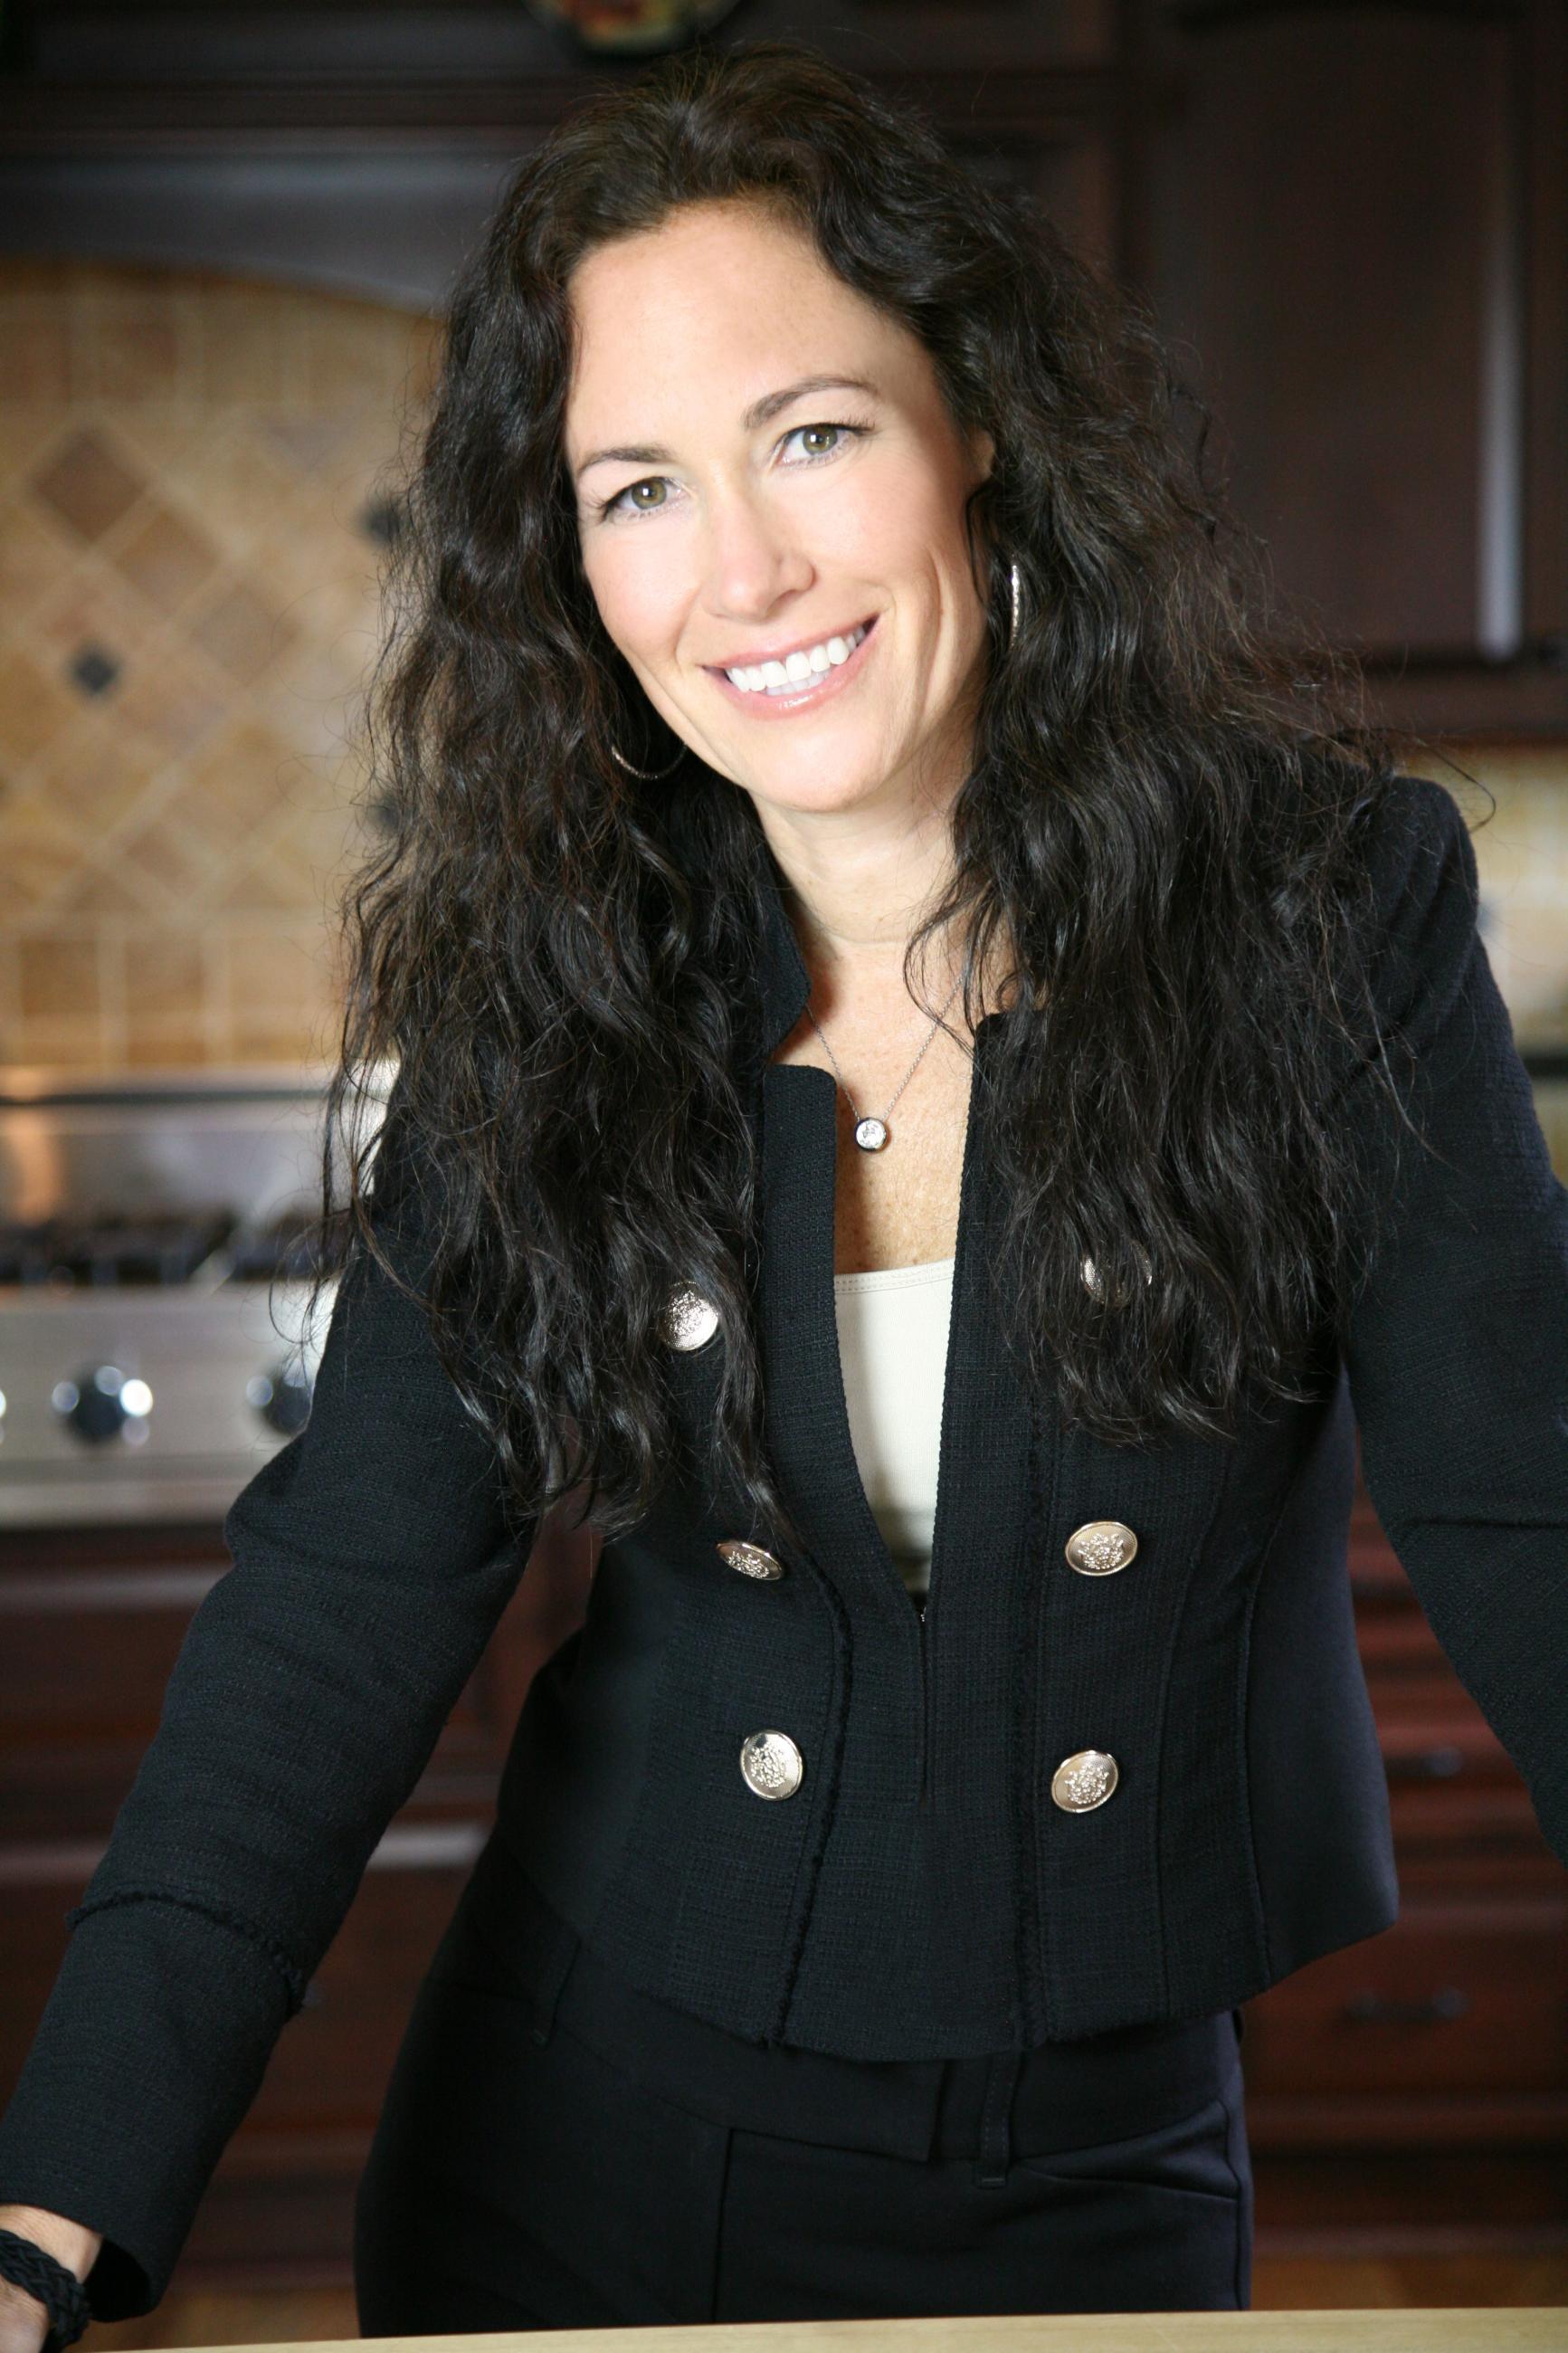 A white woman with long, dark hair wearing a dark blazer in a kitchen. Women Business Owners.